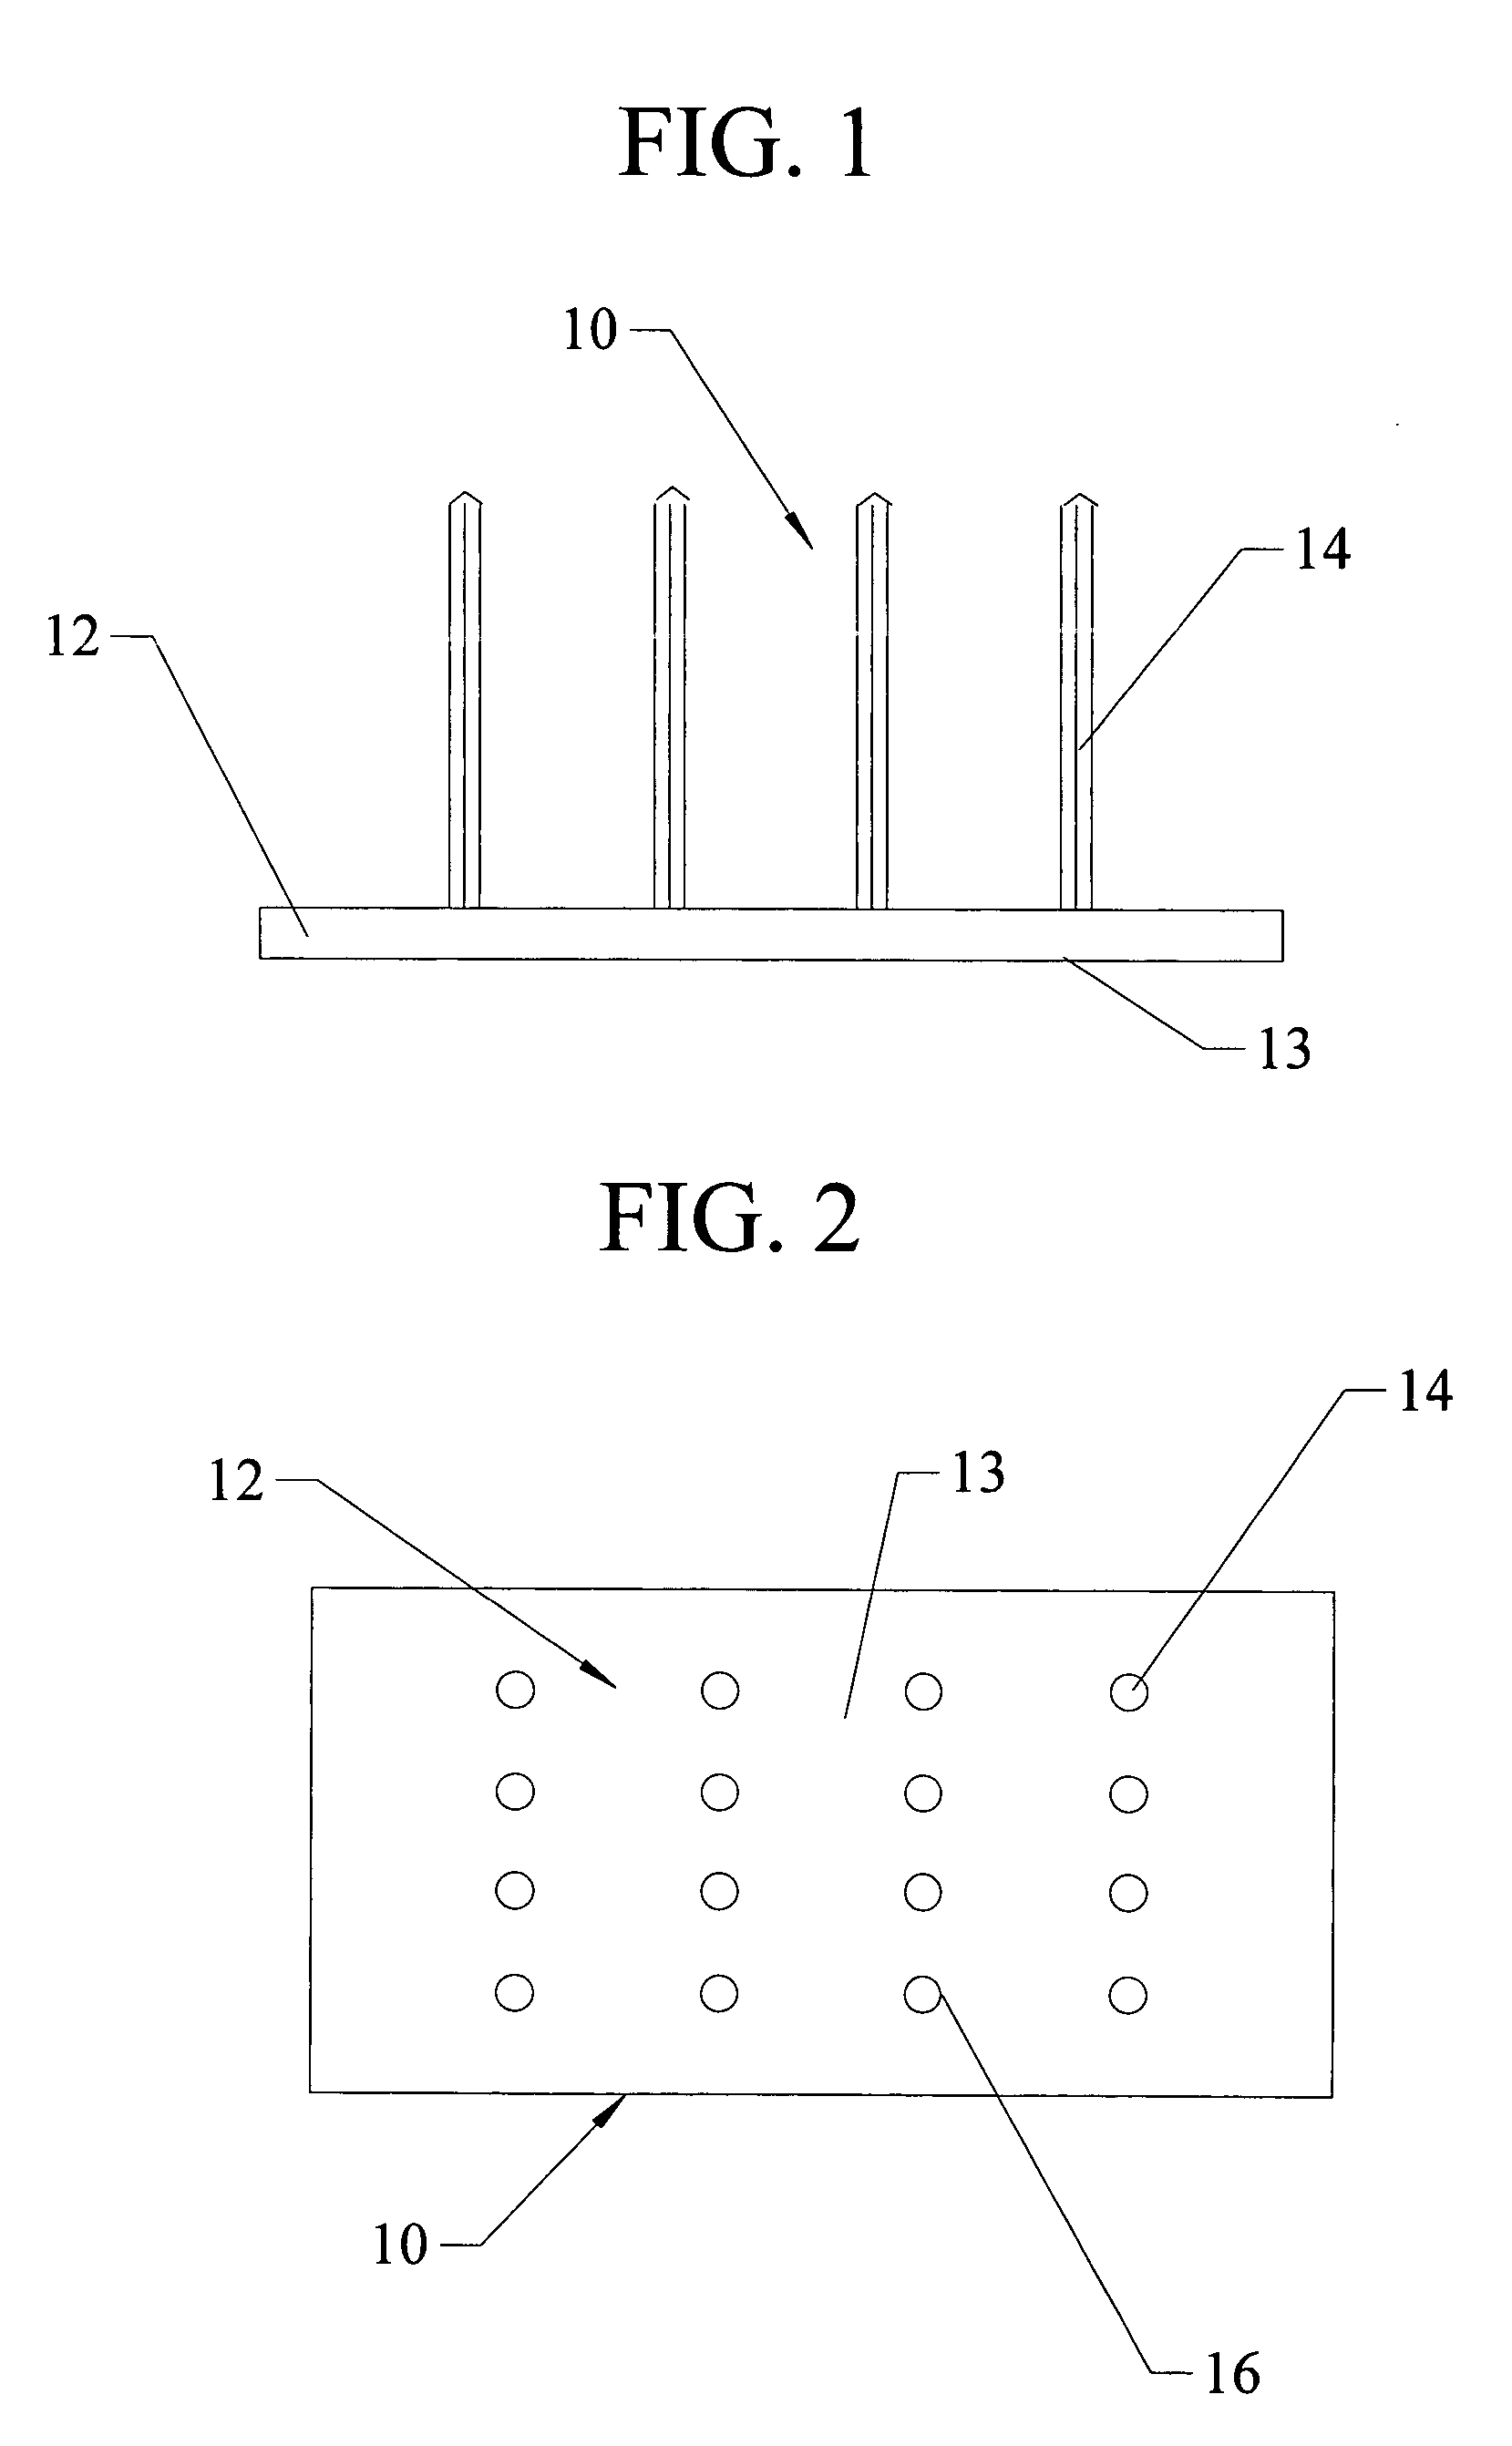 Heat sink, assembly, and method of making